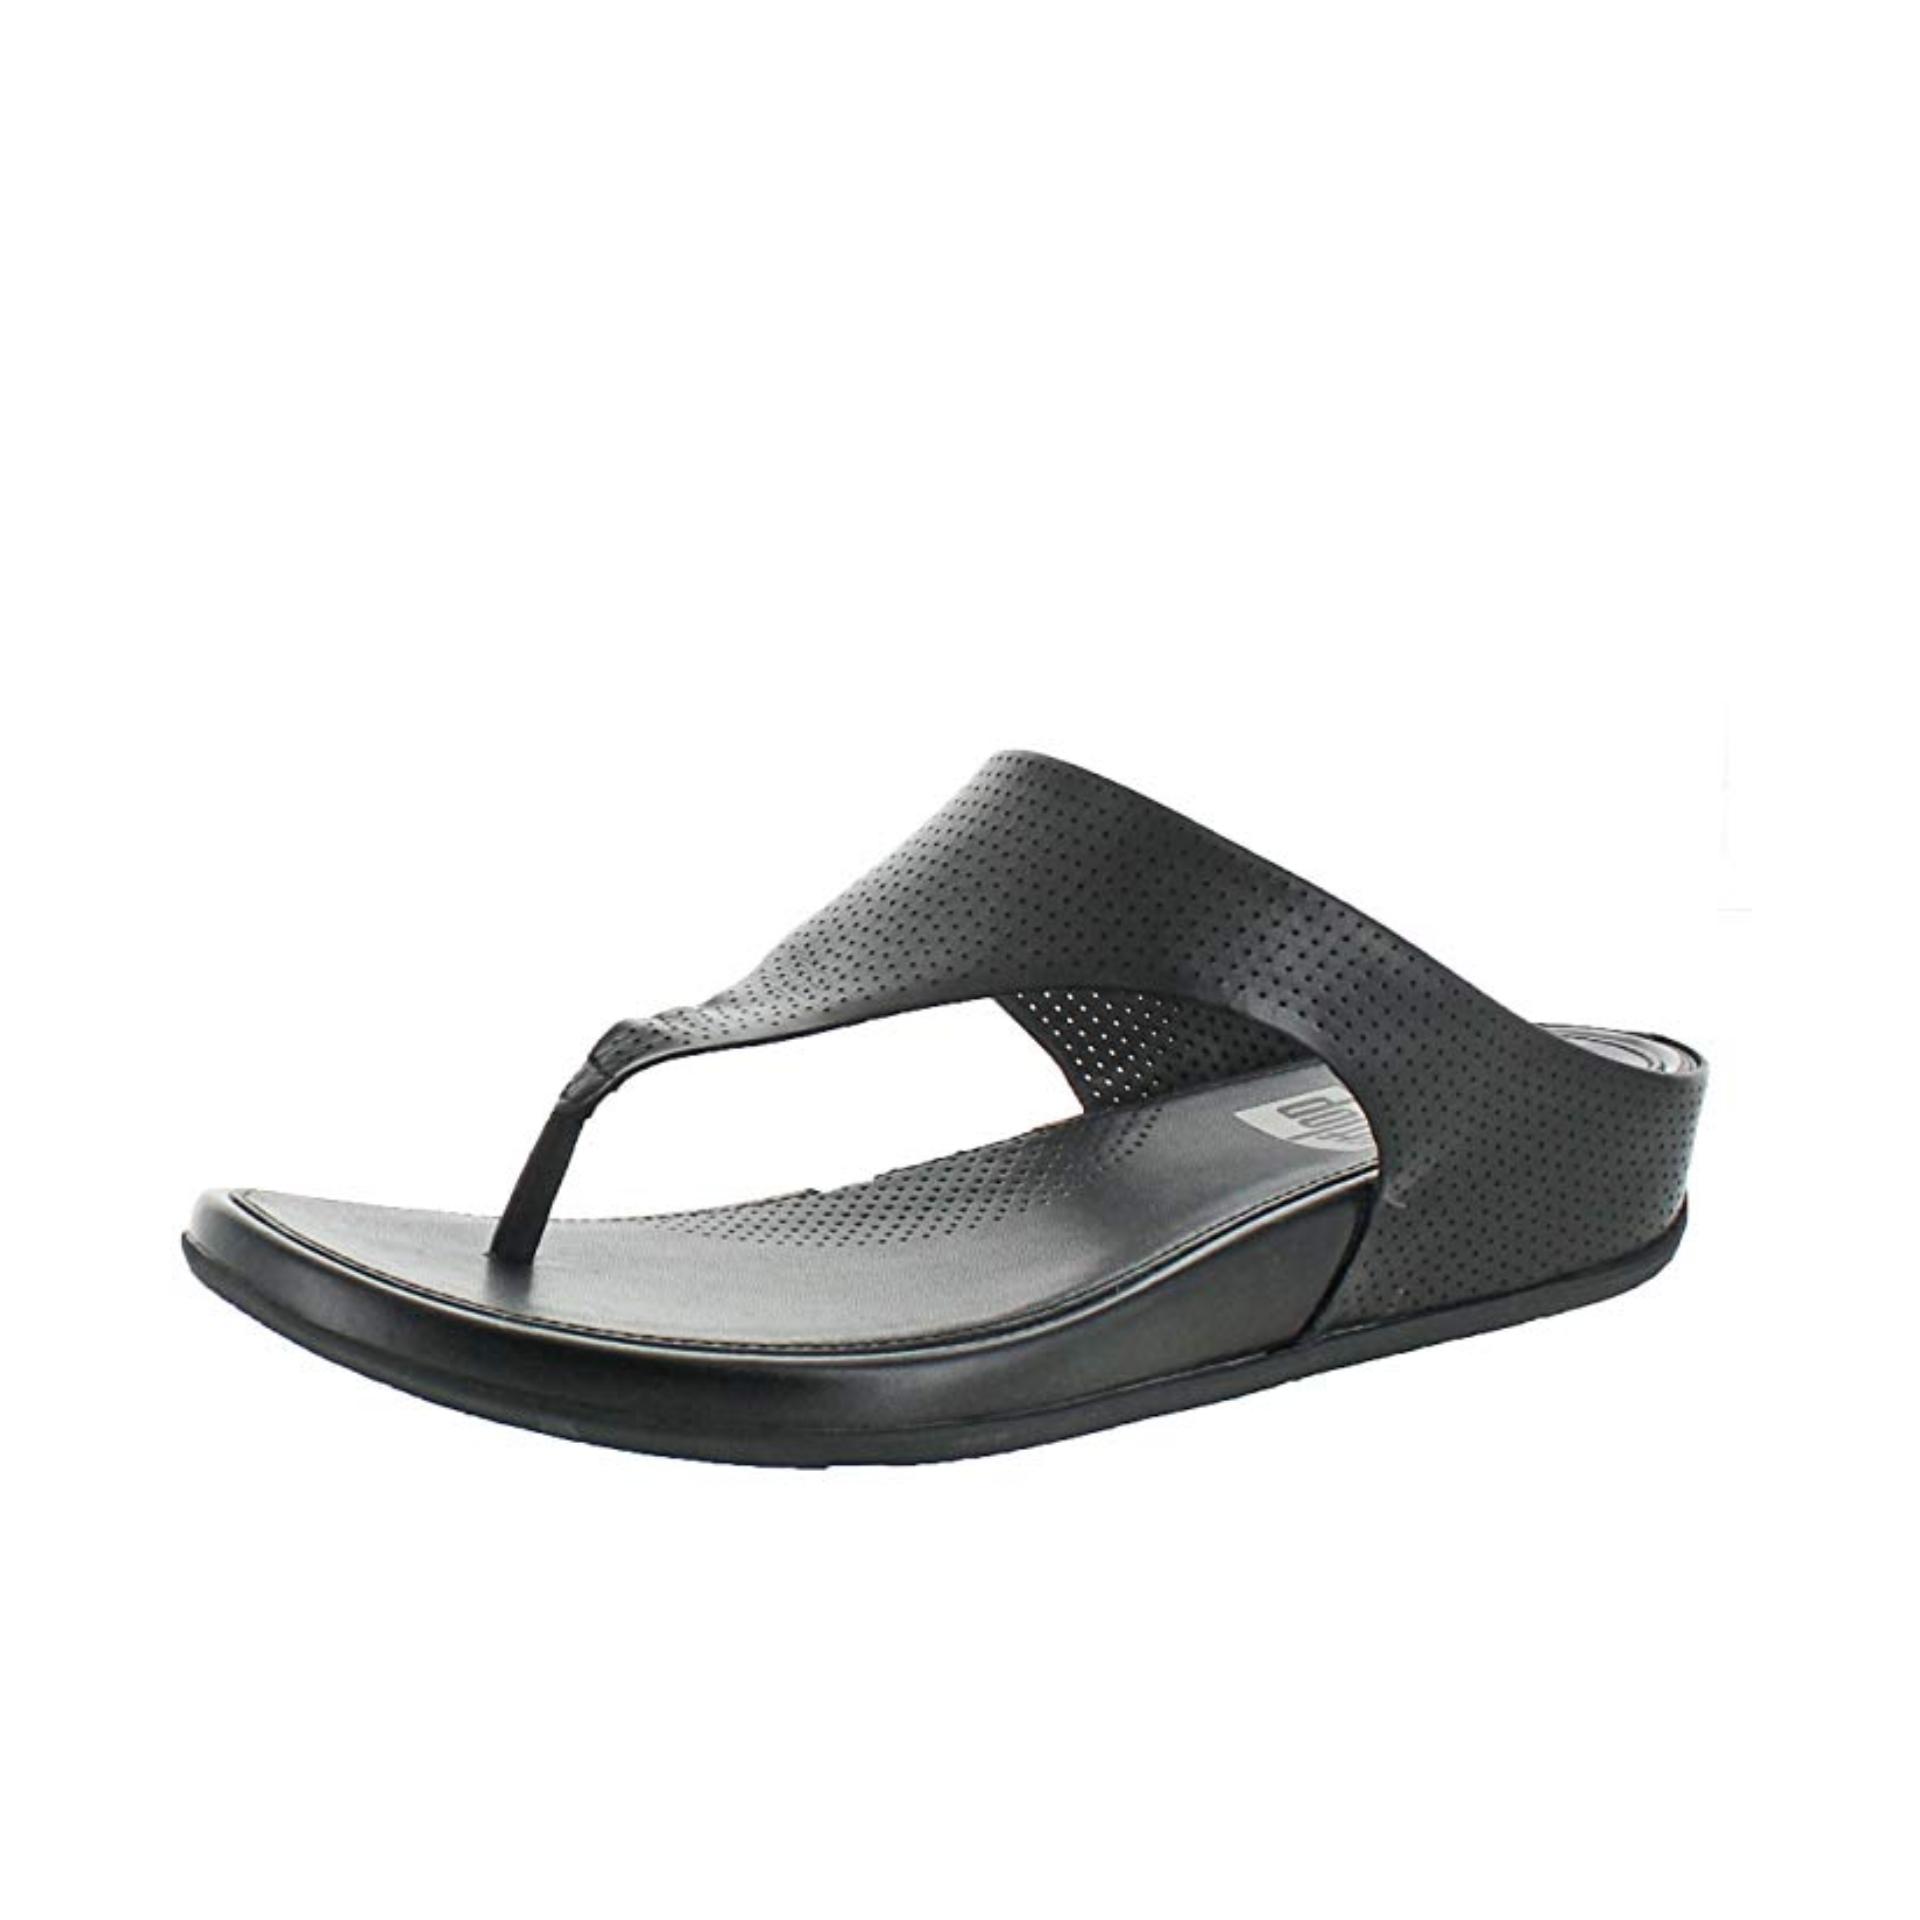 100% AUTHENTIC BRAND NEW FitFlop Womens 